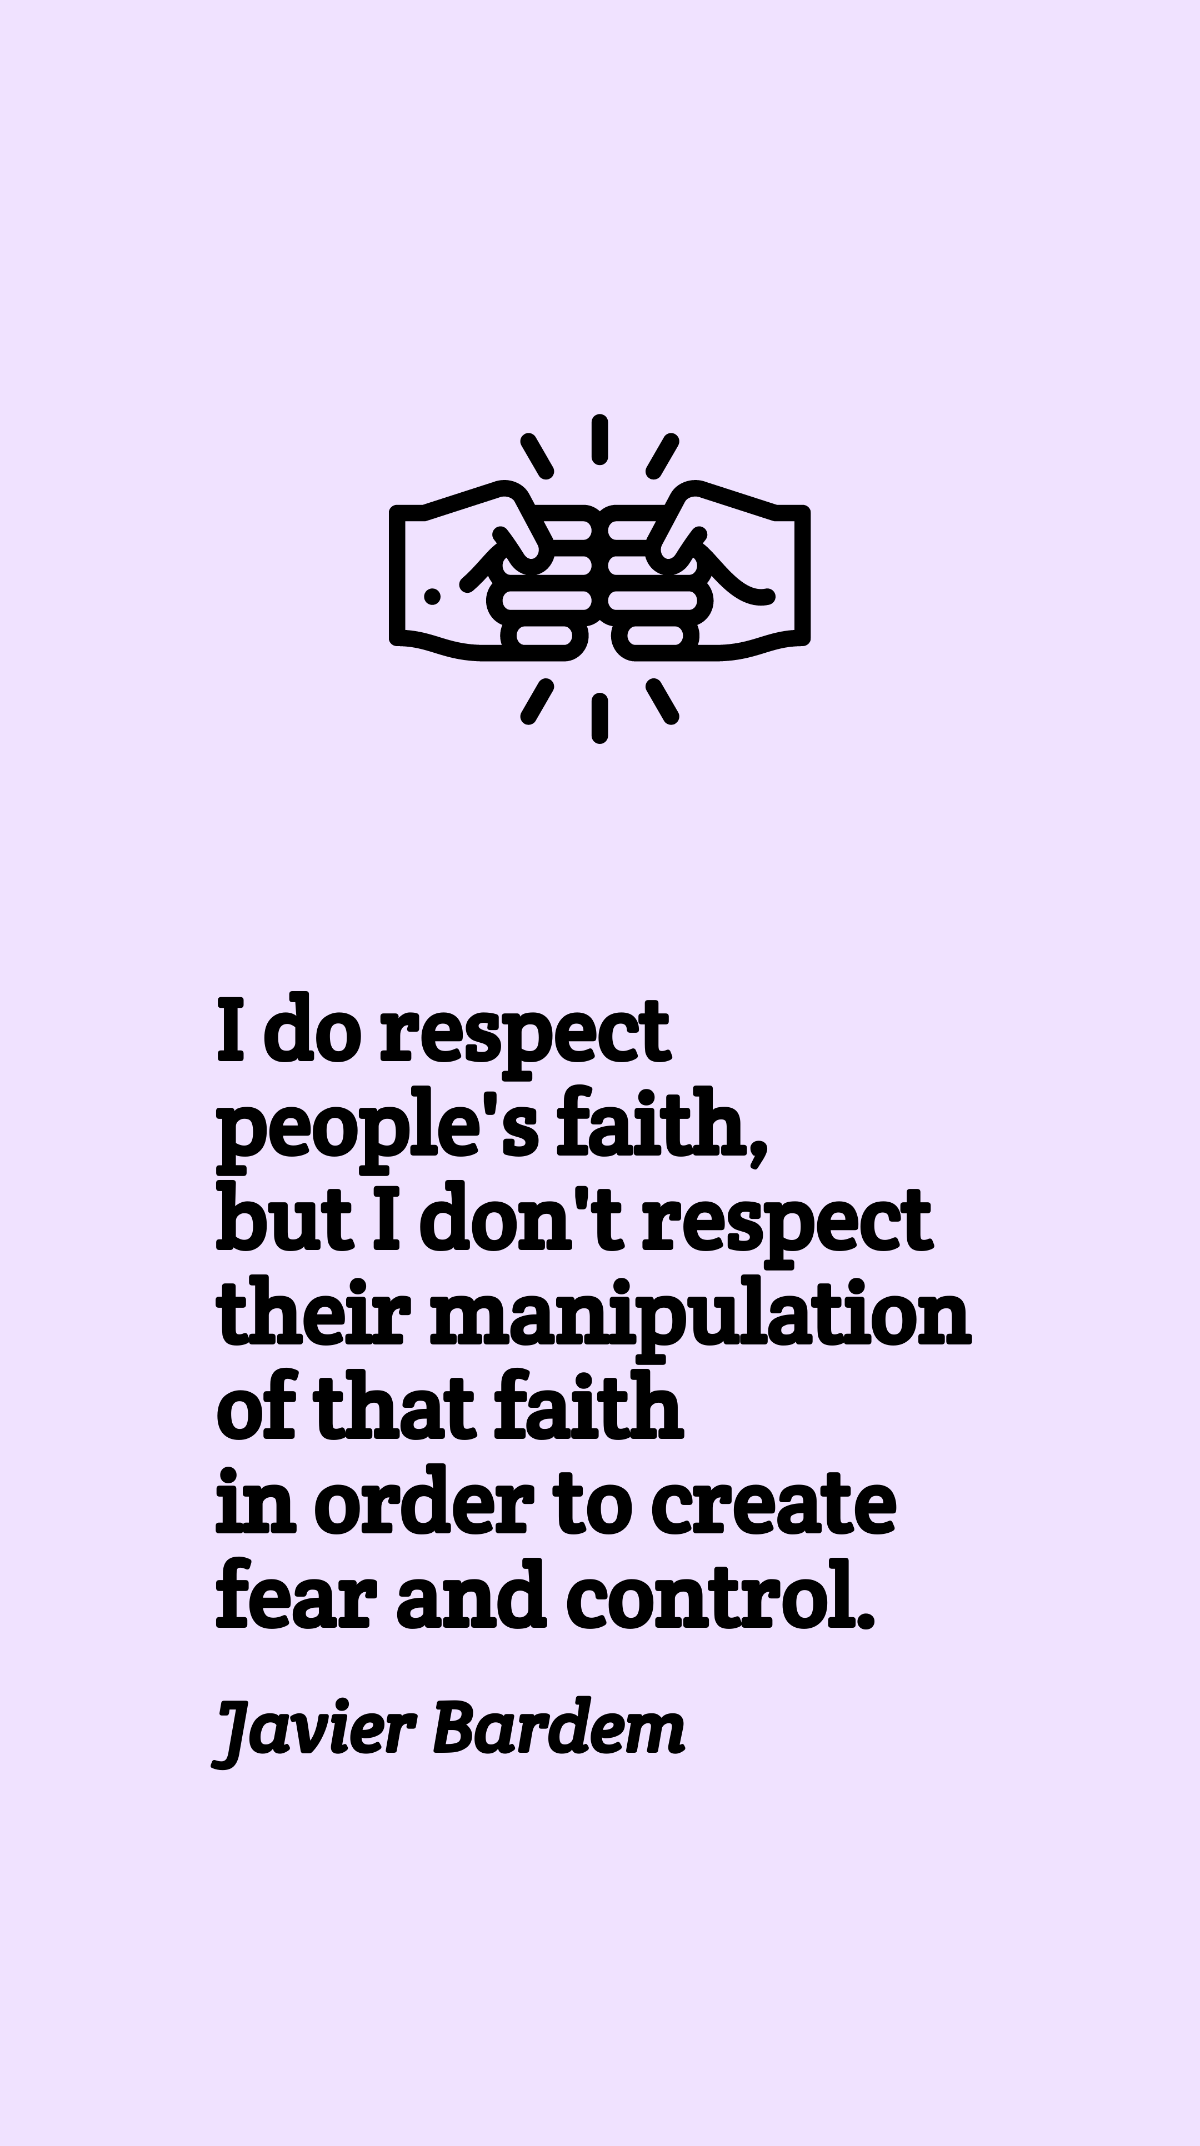 Free Javier Bardem - I do respect people's faith, but I don't respect their manipulation of that faith in order to create fear and control. Template